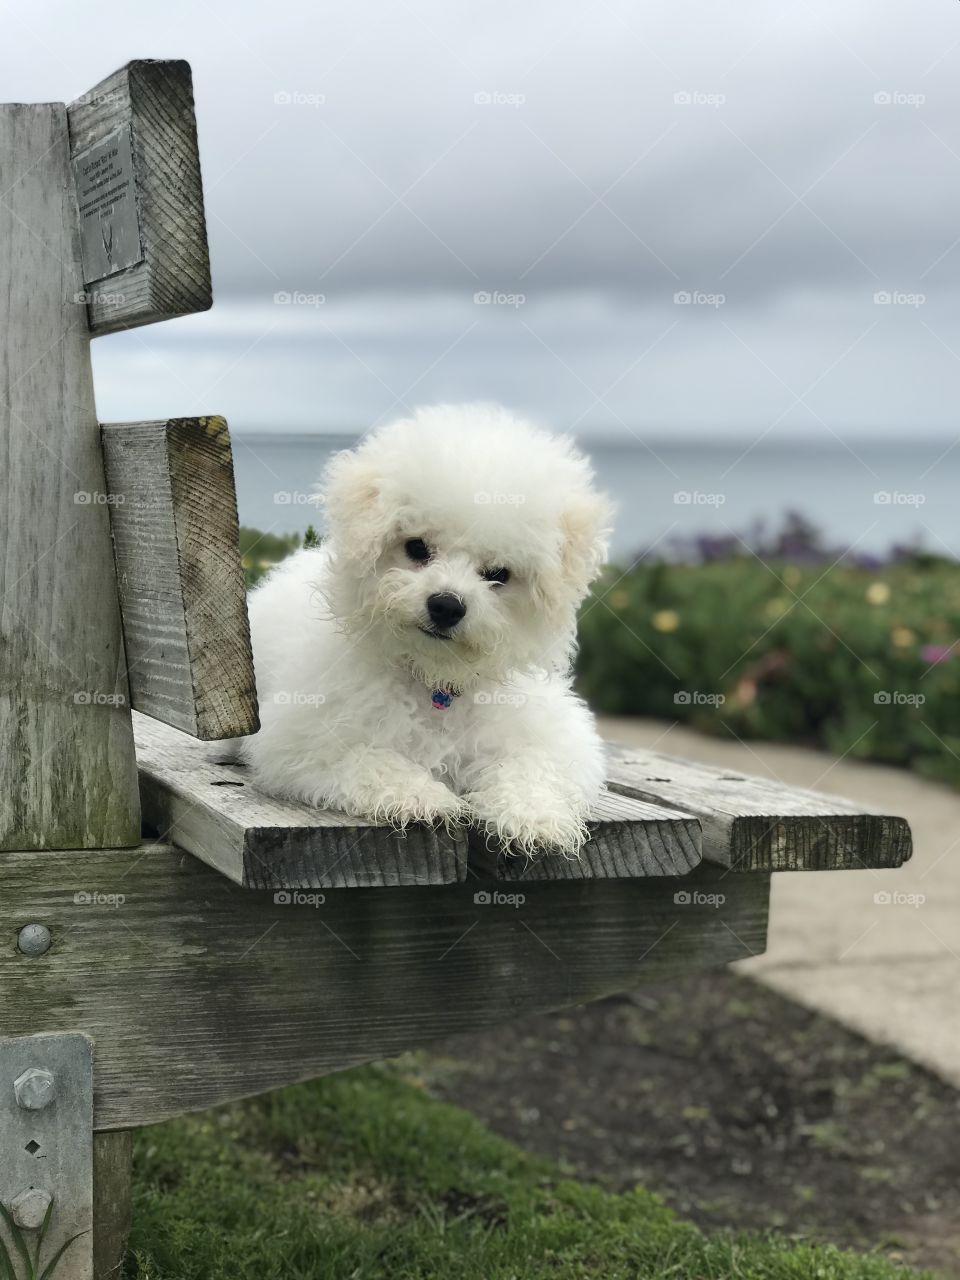 A stormy sky exists above a small white puppy who is looking directly at the viewer while resting on a wooden bench with native Californian plants and ocean in the background.